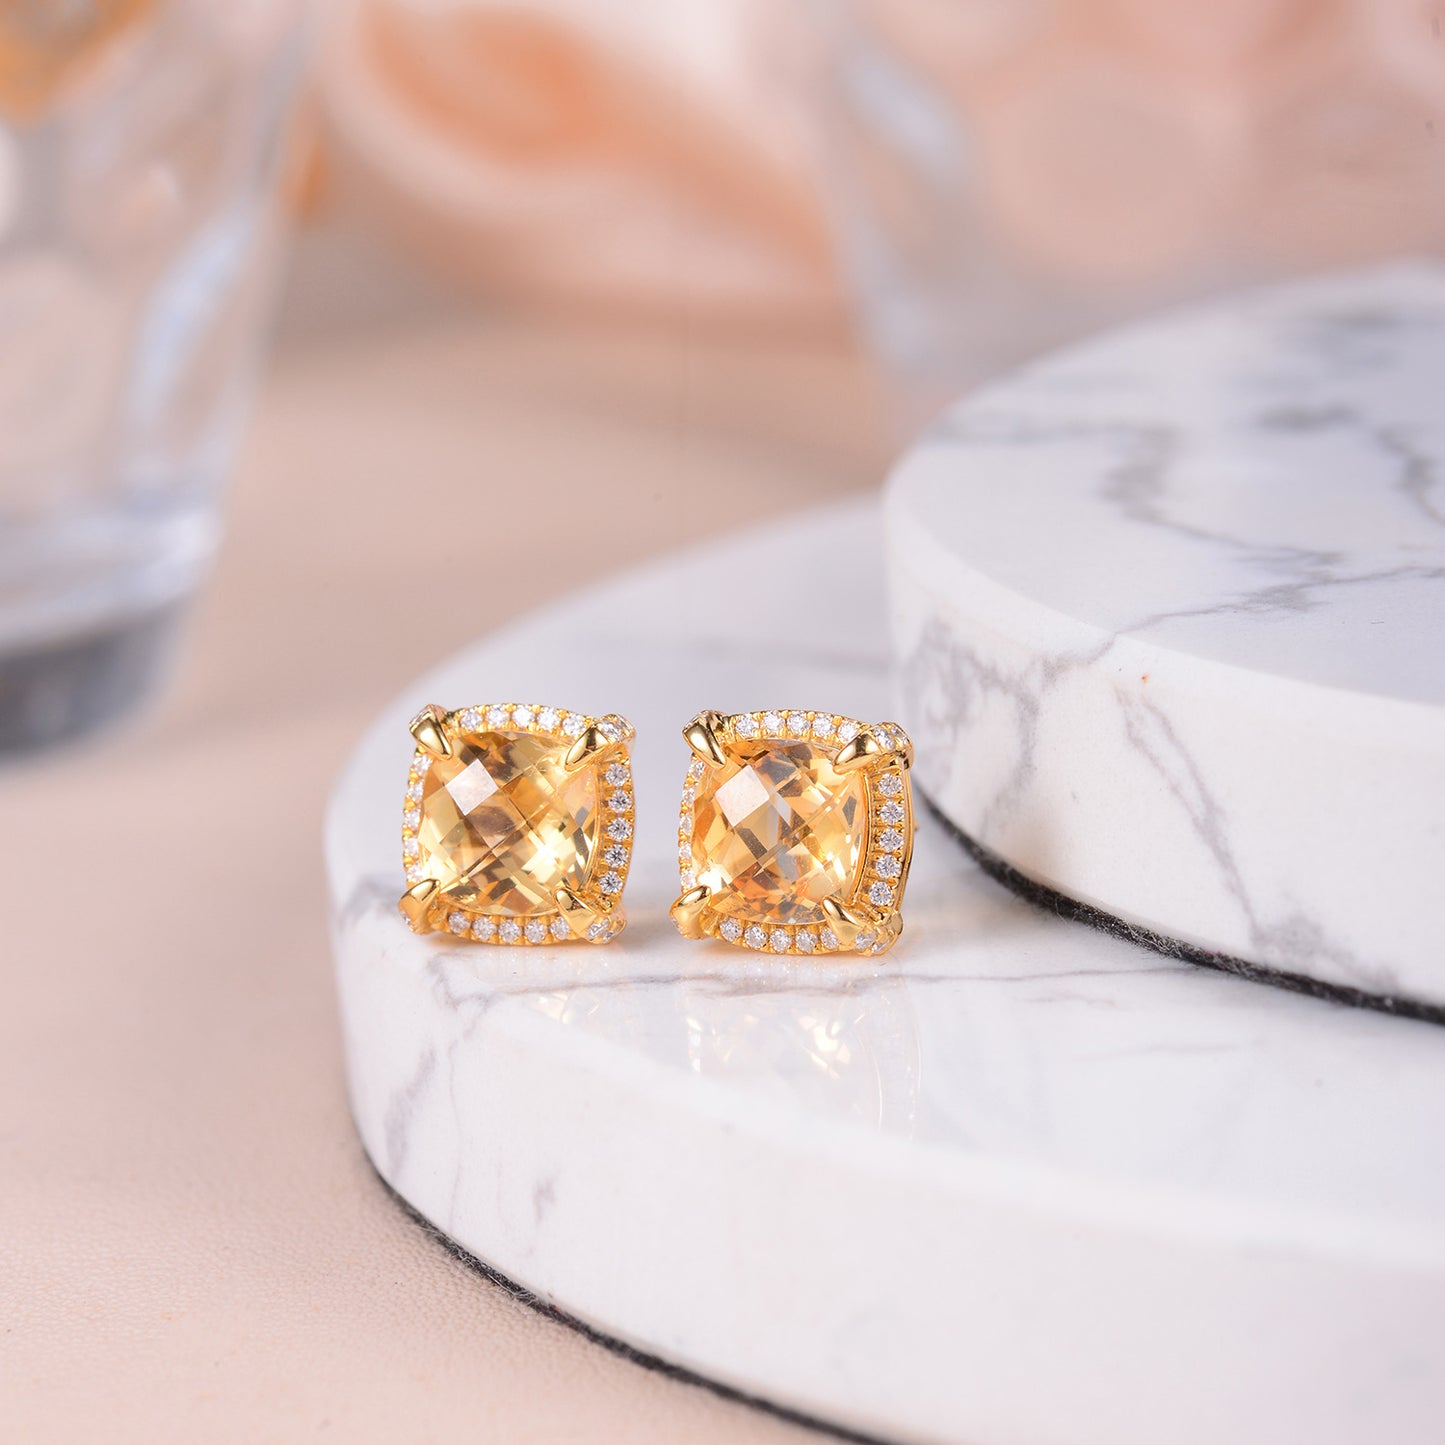 Soleste Halo Square Natural Yellow Crystal Silver Stud Earrings